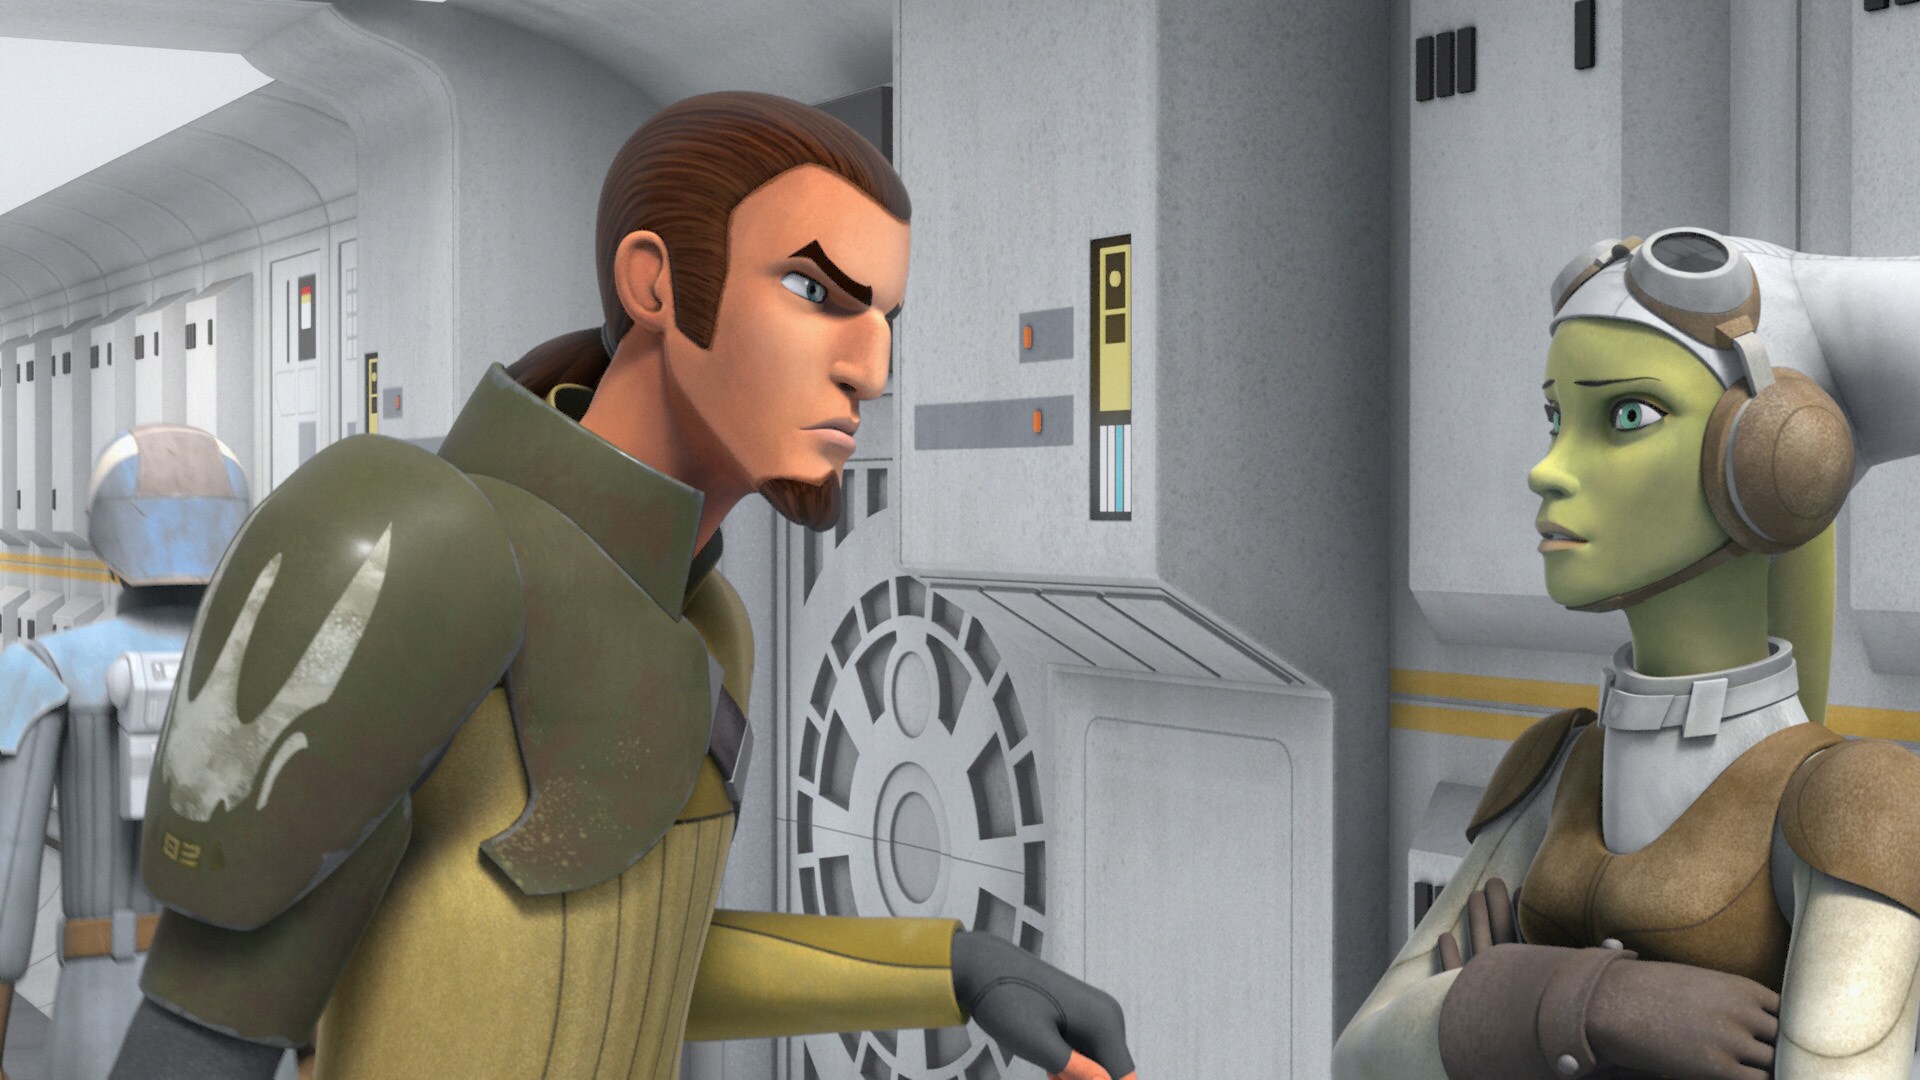 After the meeting, Kanan express his overall unease at joining this larger rebel operation. While...